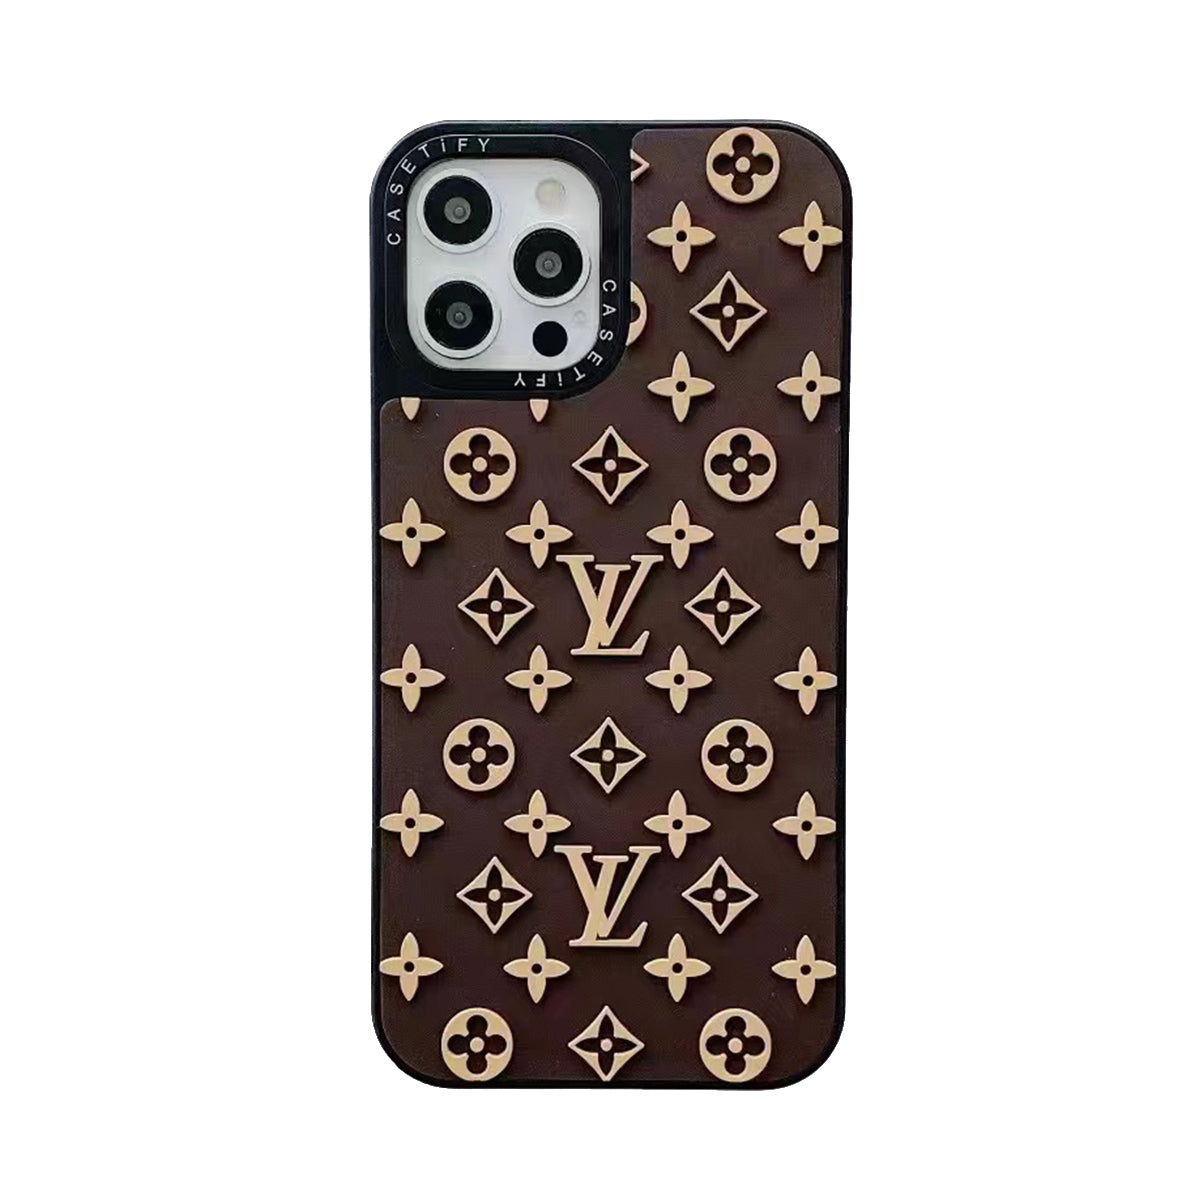 SHAAPA Luxury Brand Frosted Hybrid Mirror Case - iPhone (LV Mirror